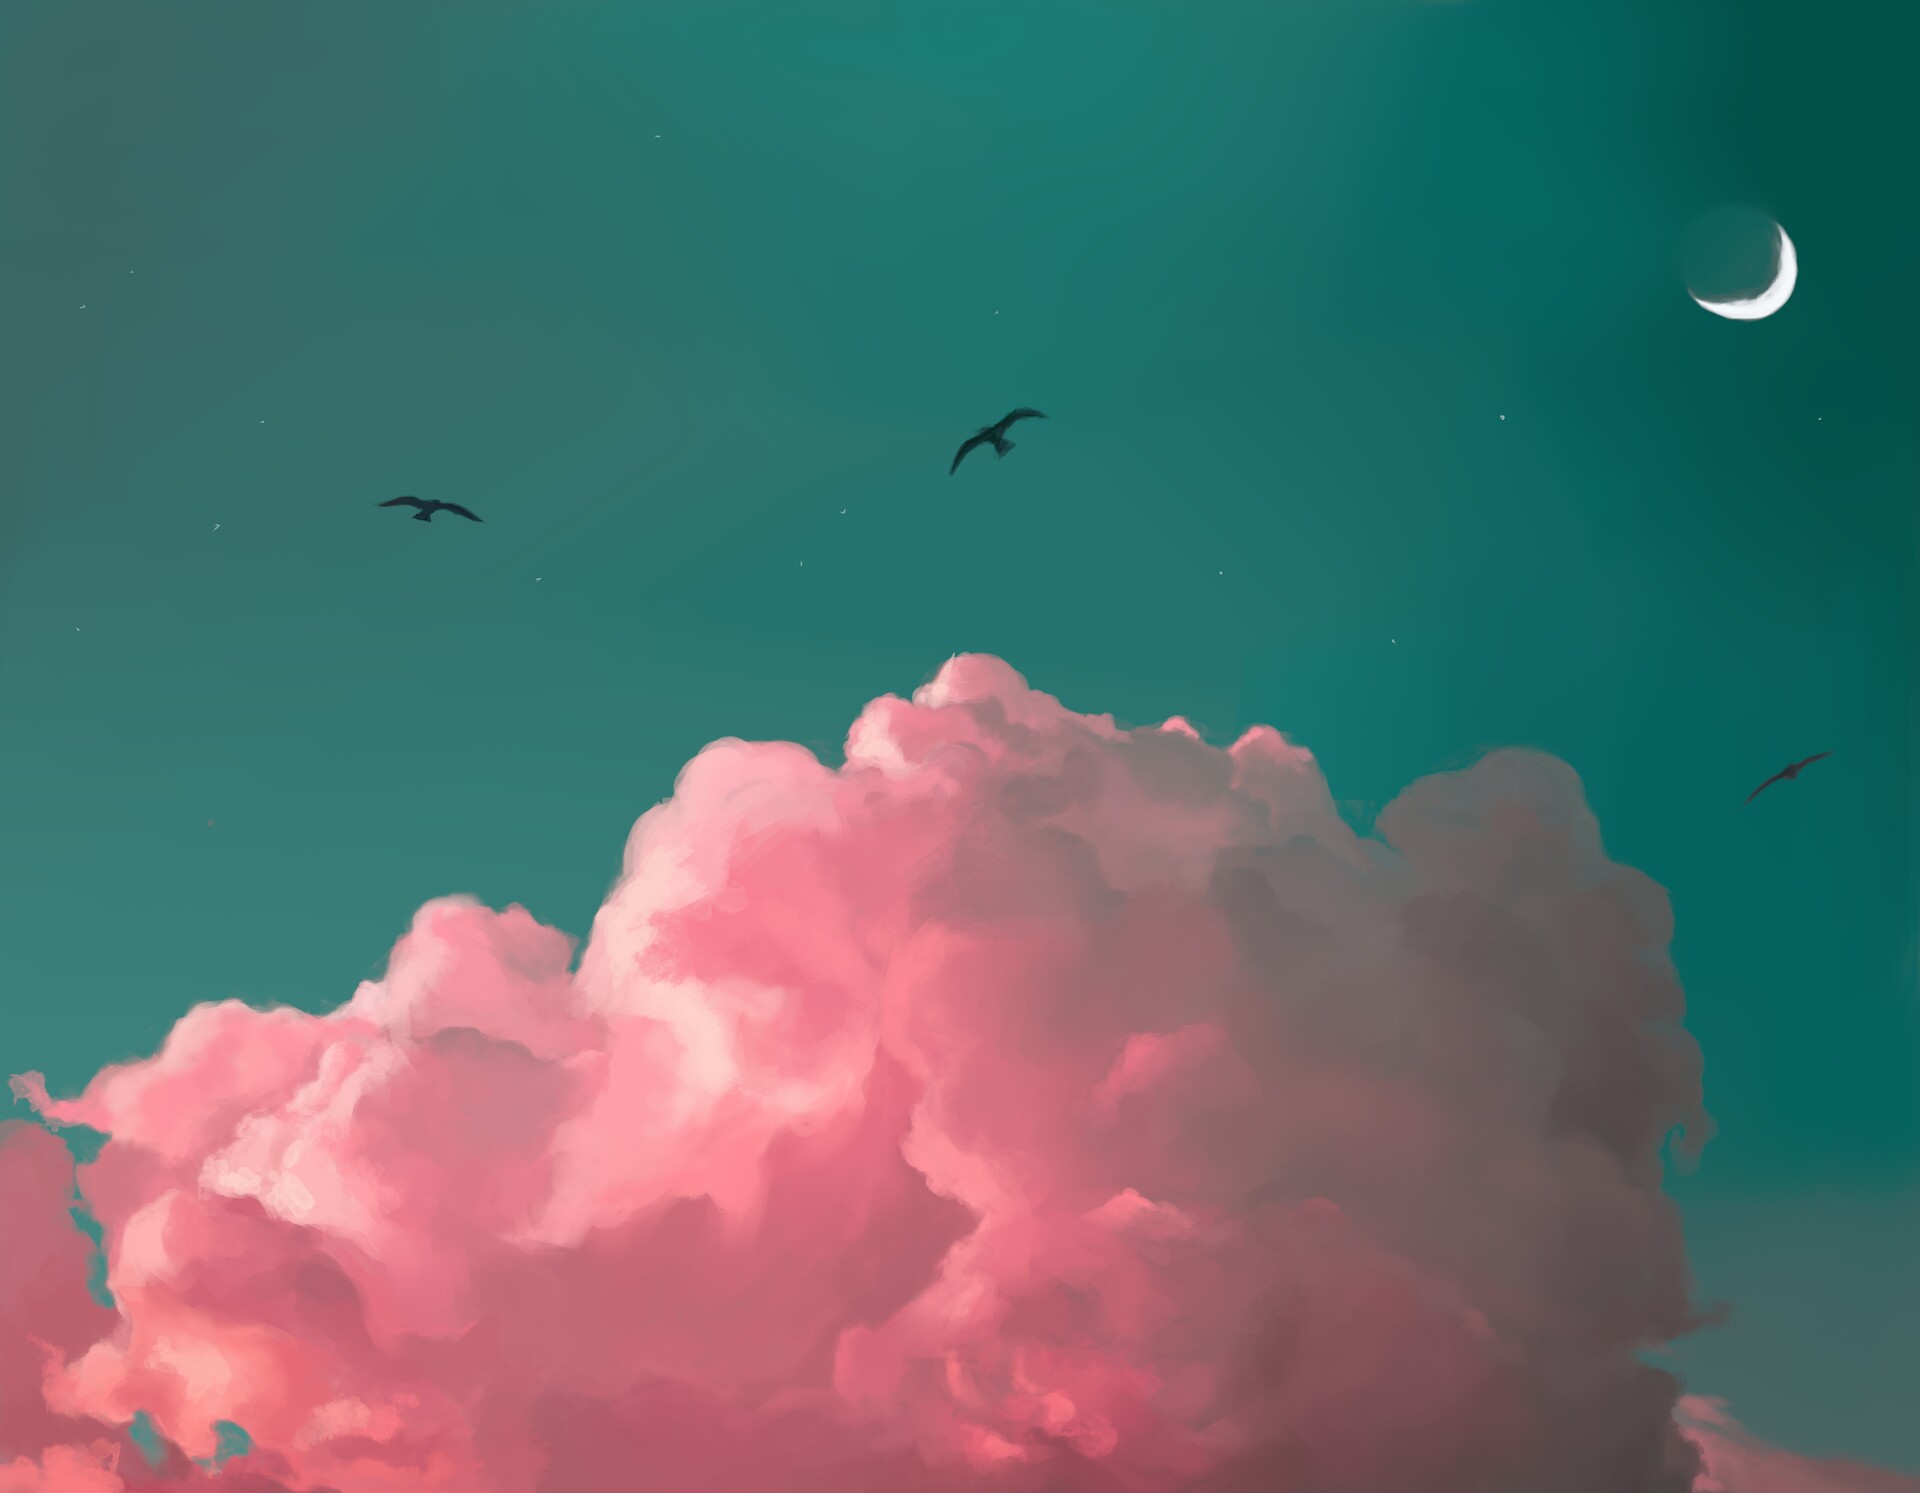 Cotton Candy Cloud Background